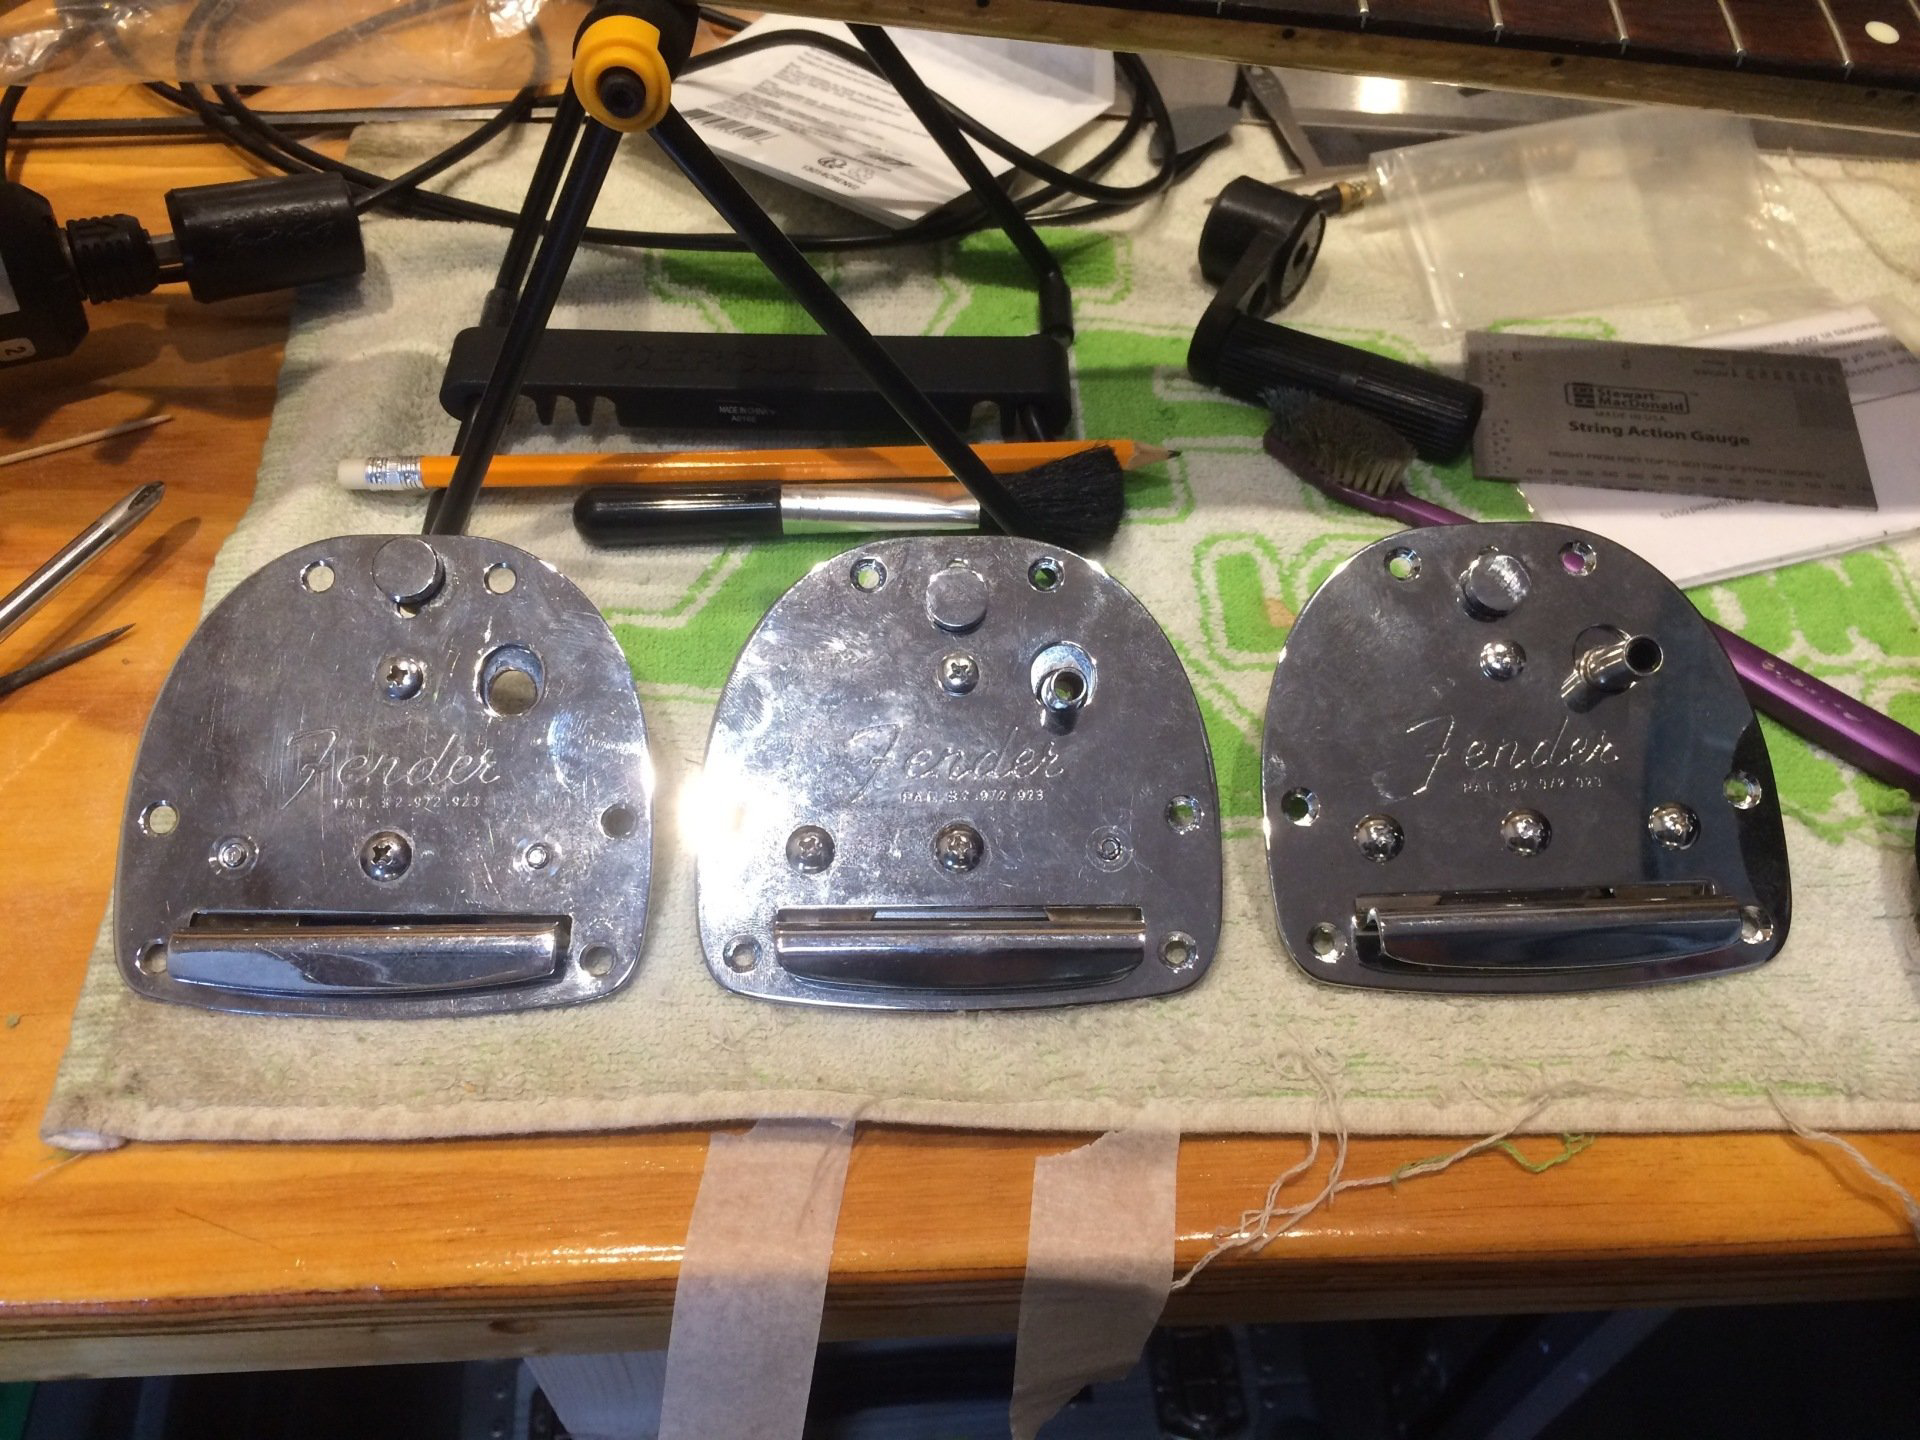 Replaced tremolo blocks for a Fender Jazzmaster on the work bench at New Cut